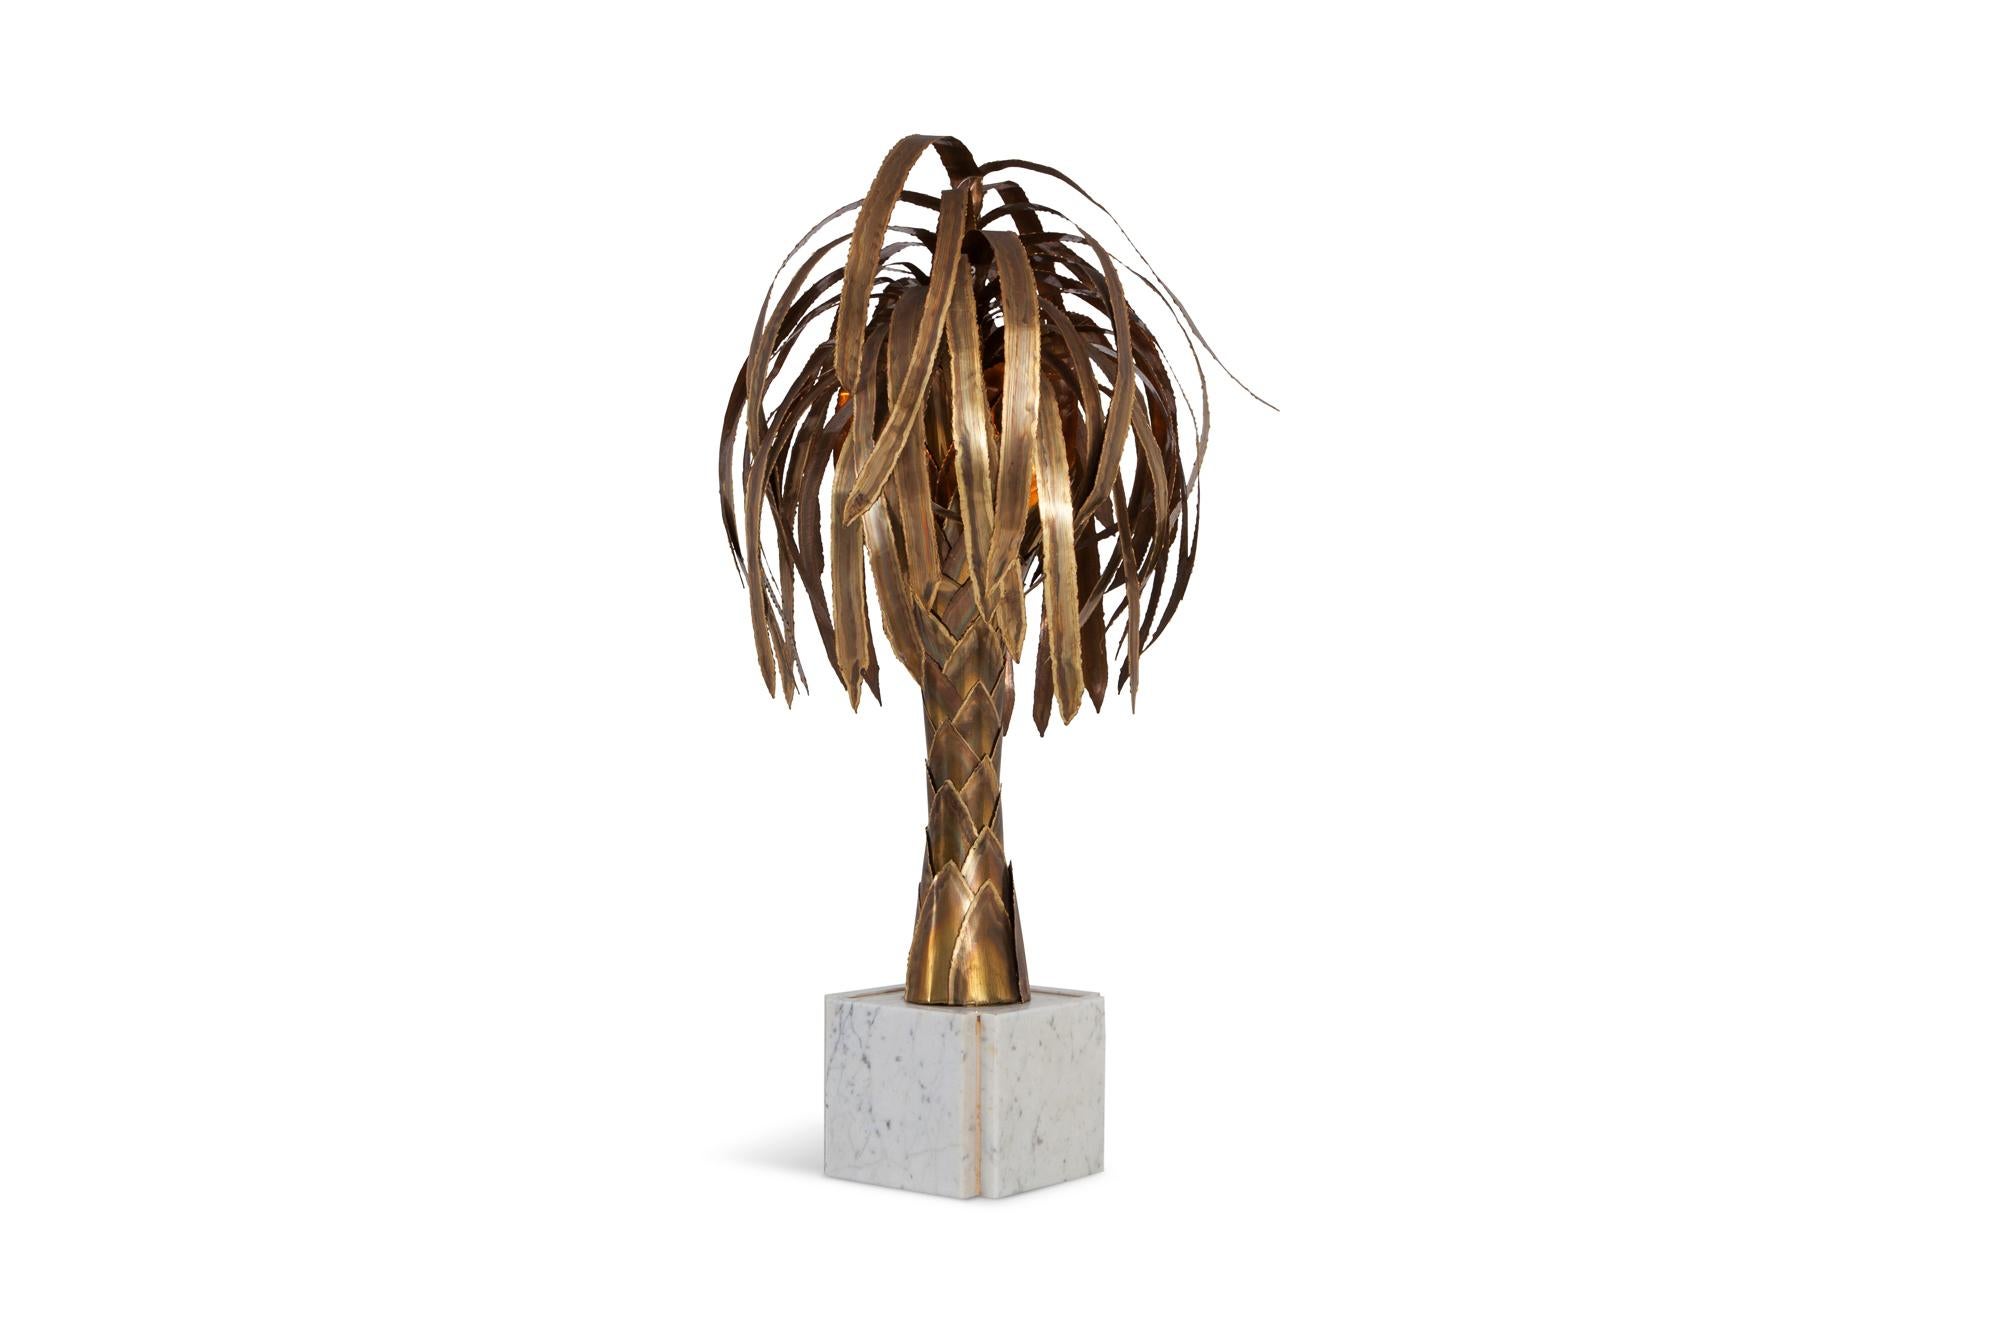 Hollywood Regency brass palm tree lamp by Maison Jansen, France 1970s.
Rare medium size model which can be used as a table or a floor lamp.

The white Carrara marble base add a touch a modern luxury.
A dimmer has been fitted on the